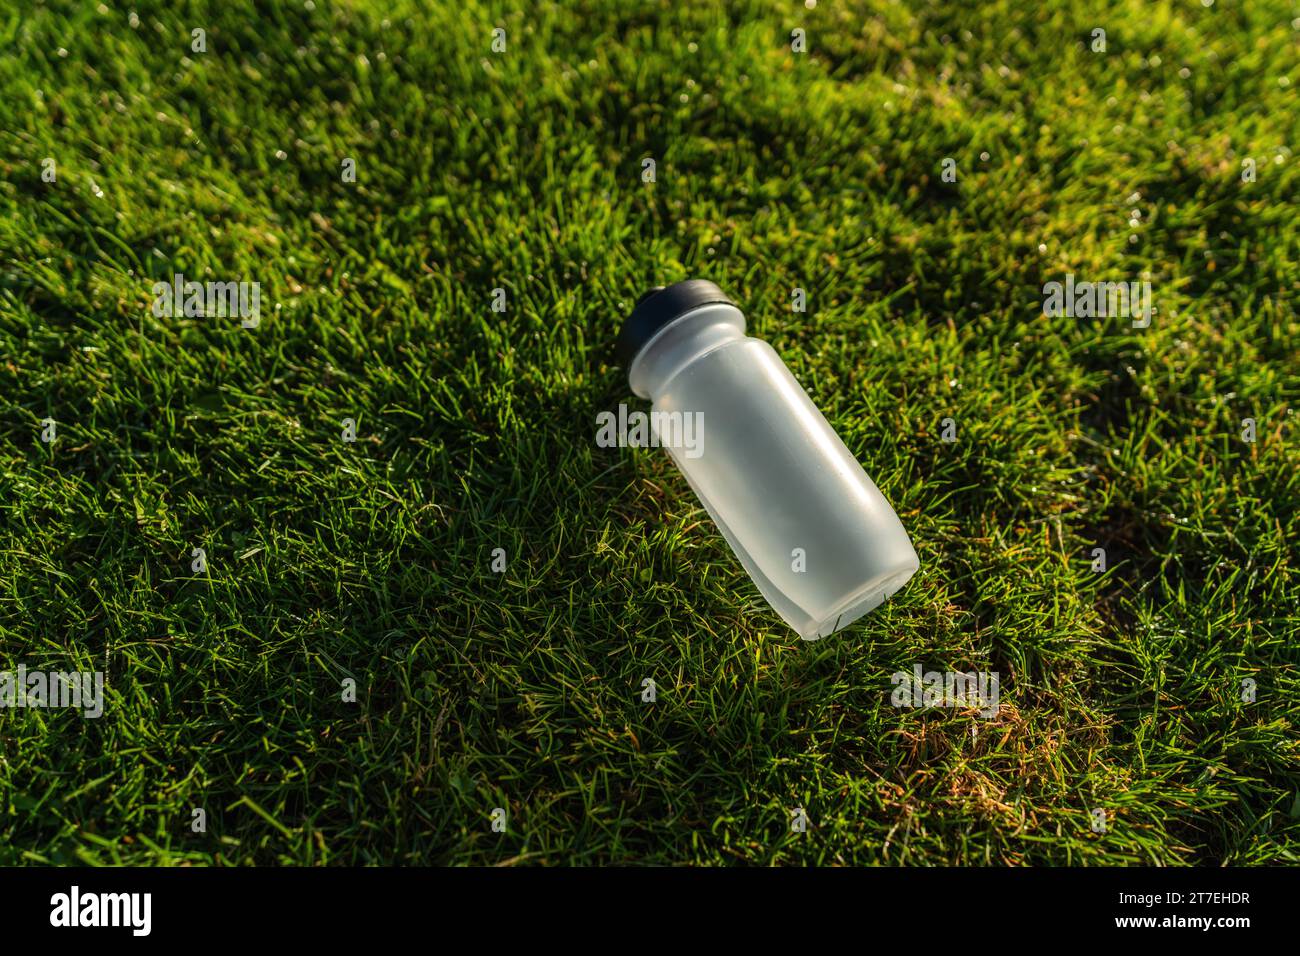 Water bottle lying on the grass in sunlight. Sports gear concept image Stock Photo